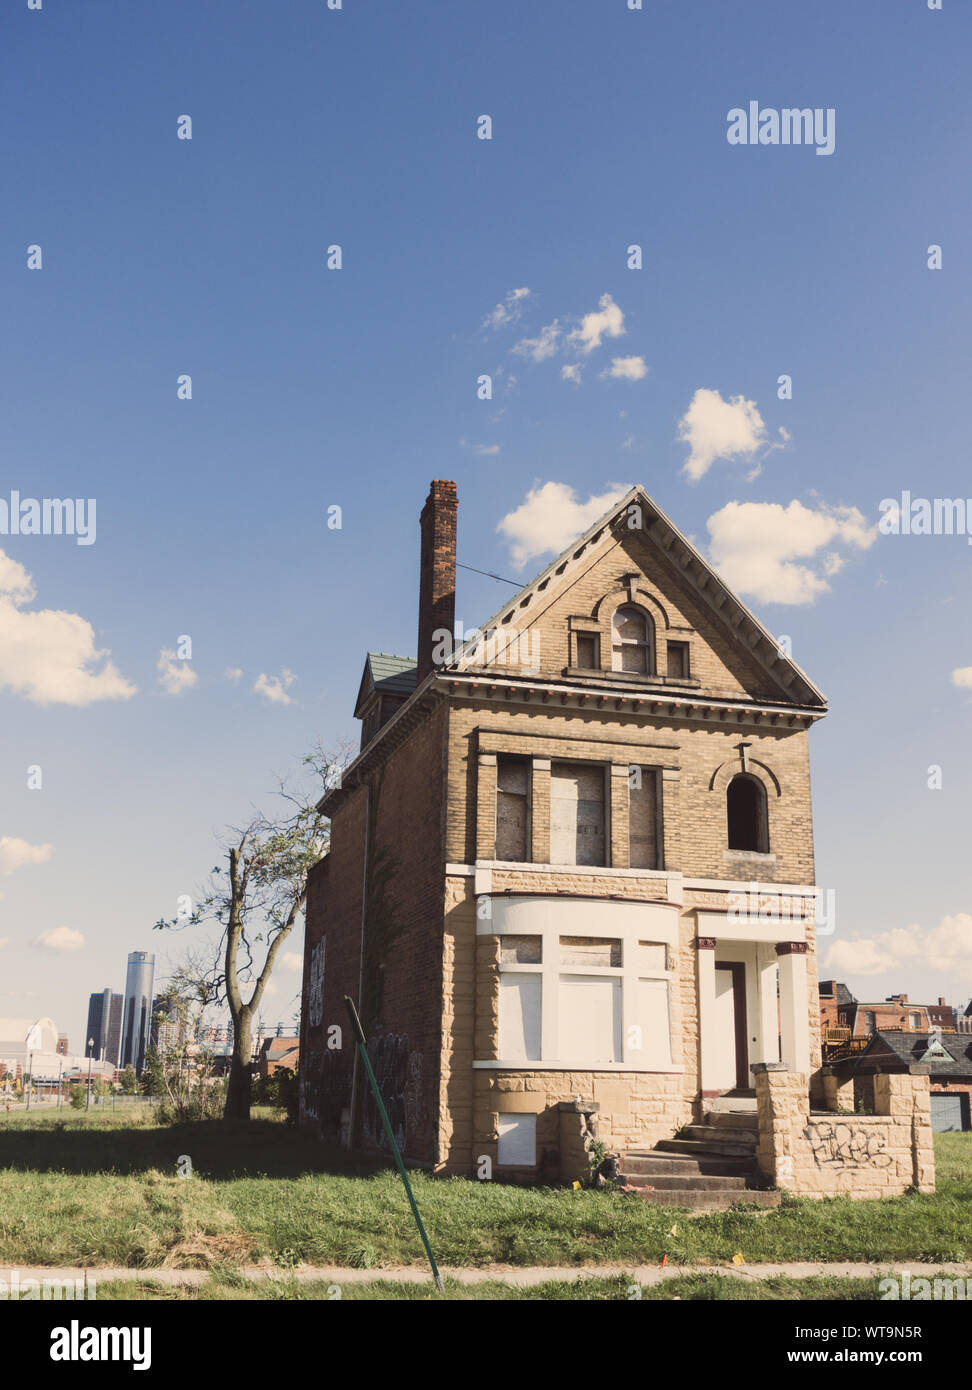 Skyscrapers of Detroit downtown are seen behind an old and neglected neighborhood Stock Photo